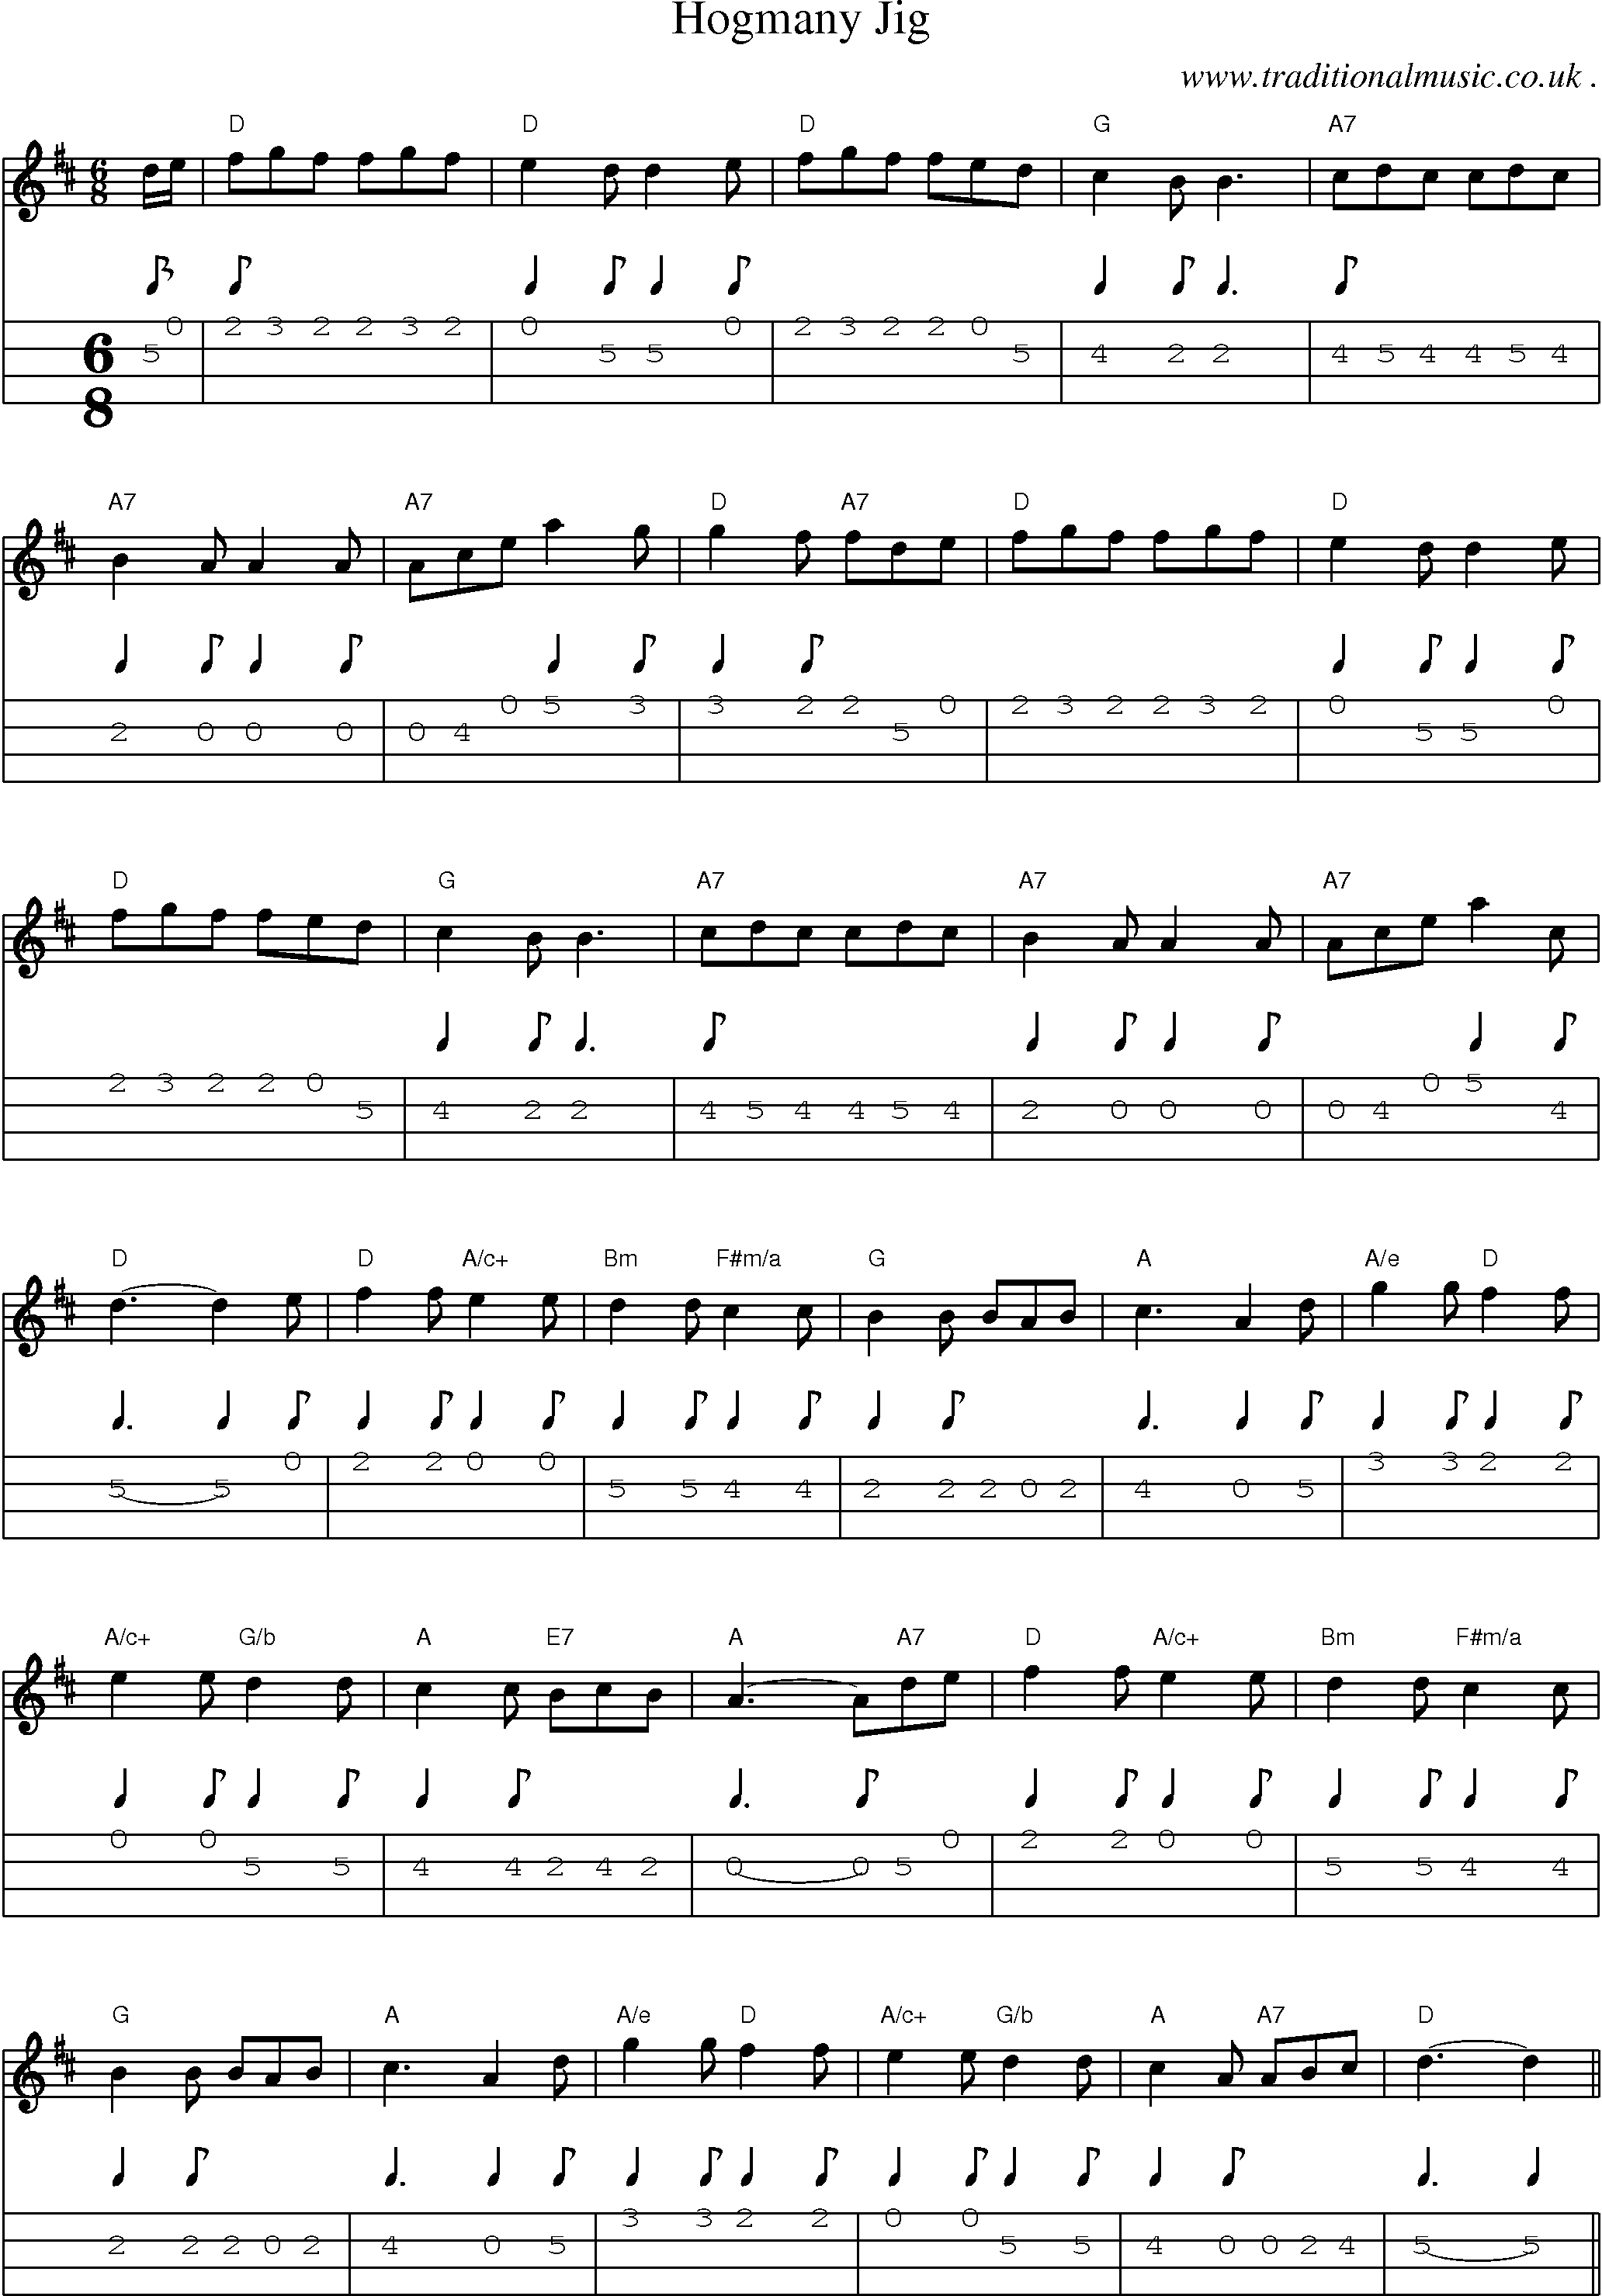 Sheet-music  score, Chords and Mandolin Tabs for Hogmany Jig